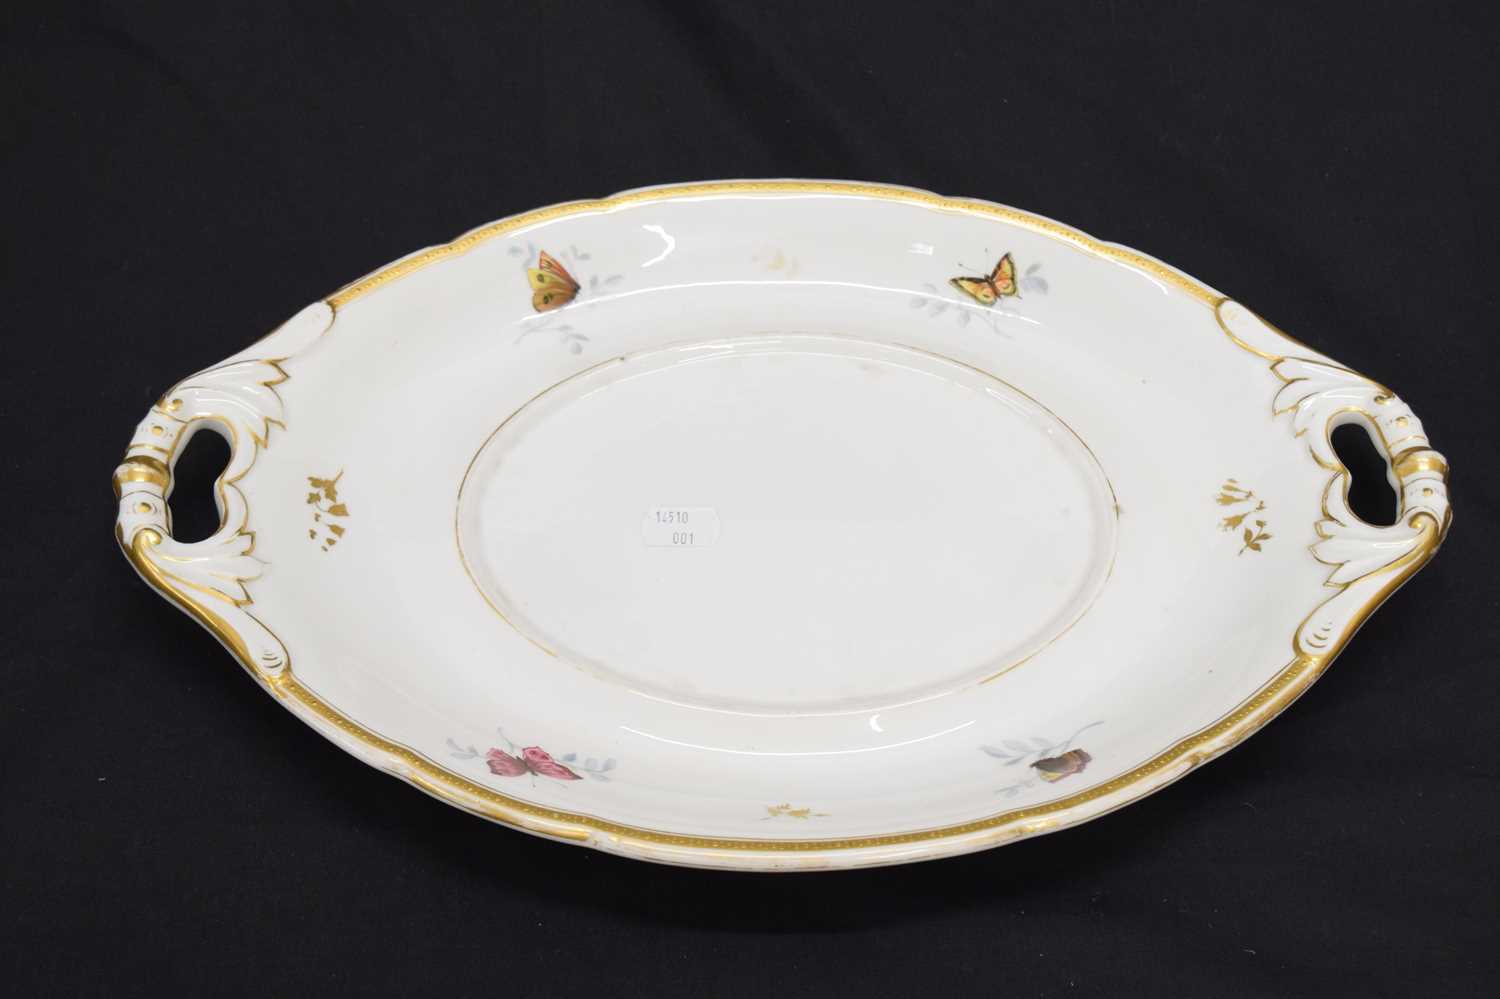 19th century Vienna porcelain dinner wares - Image 2 of 18